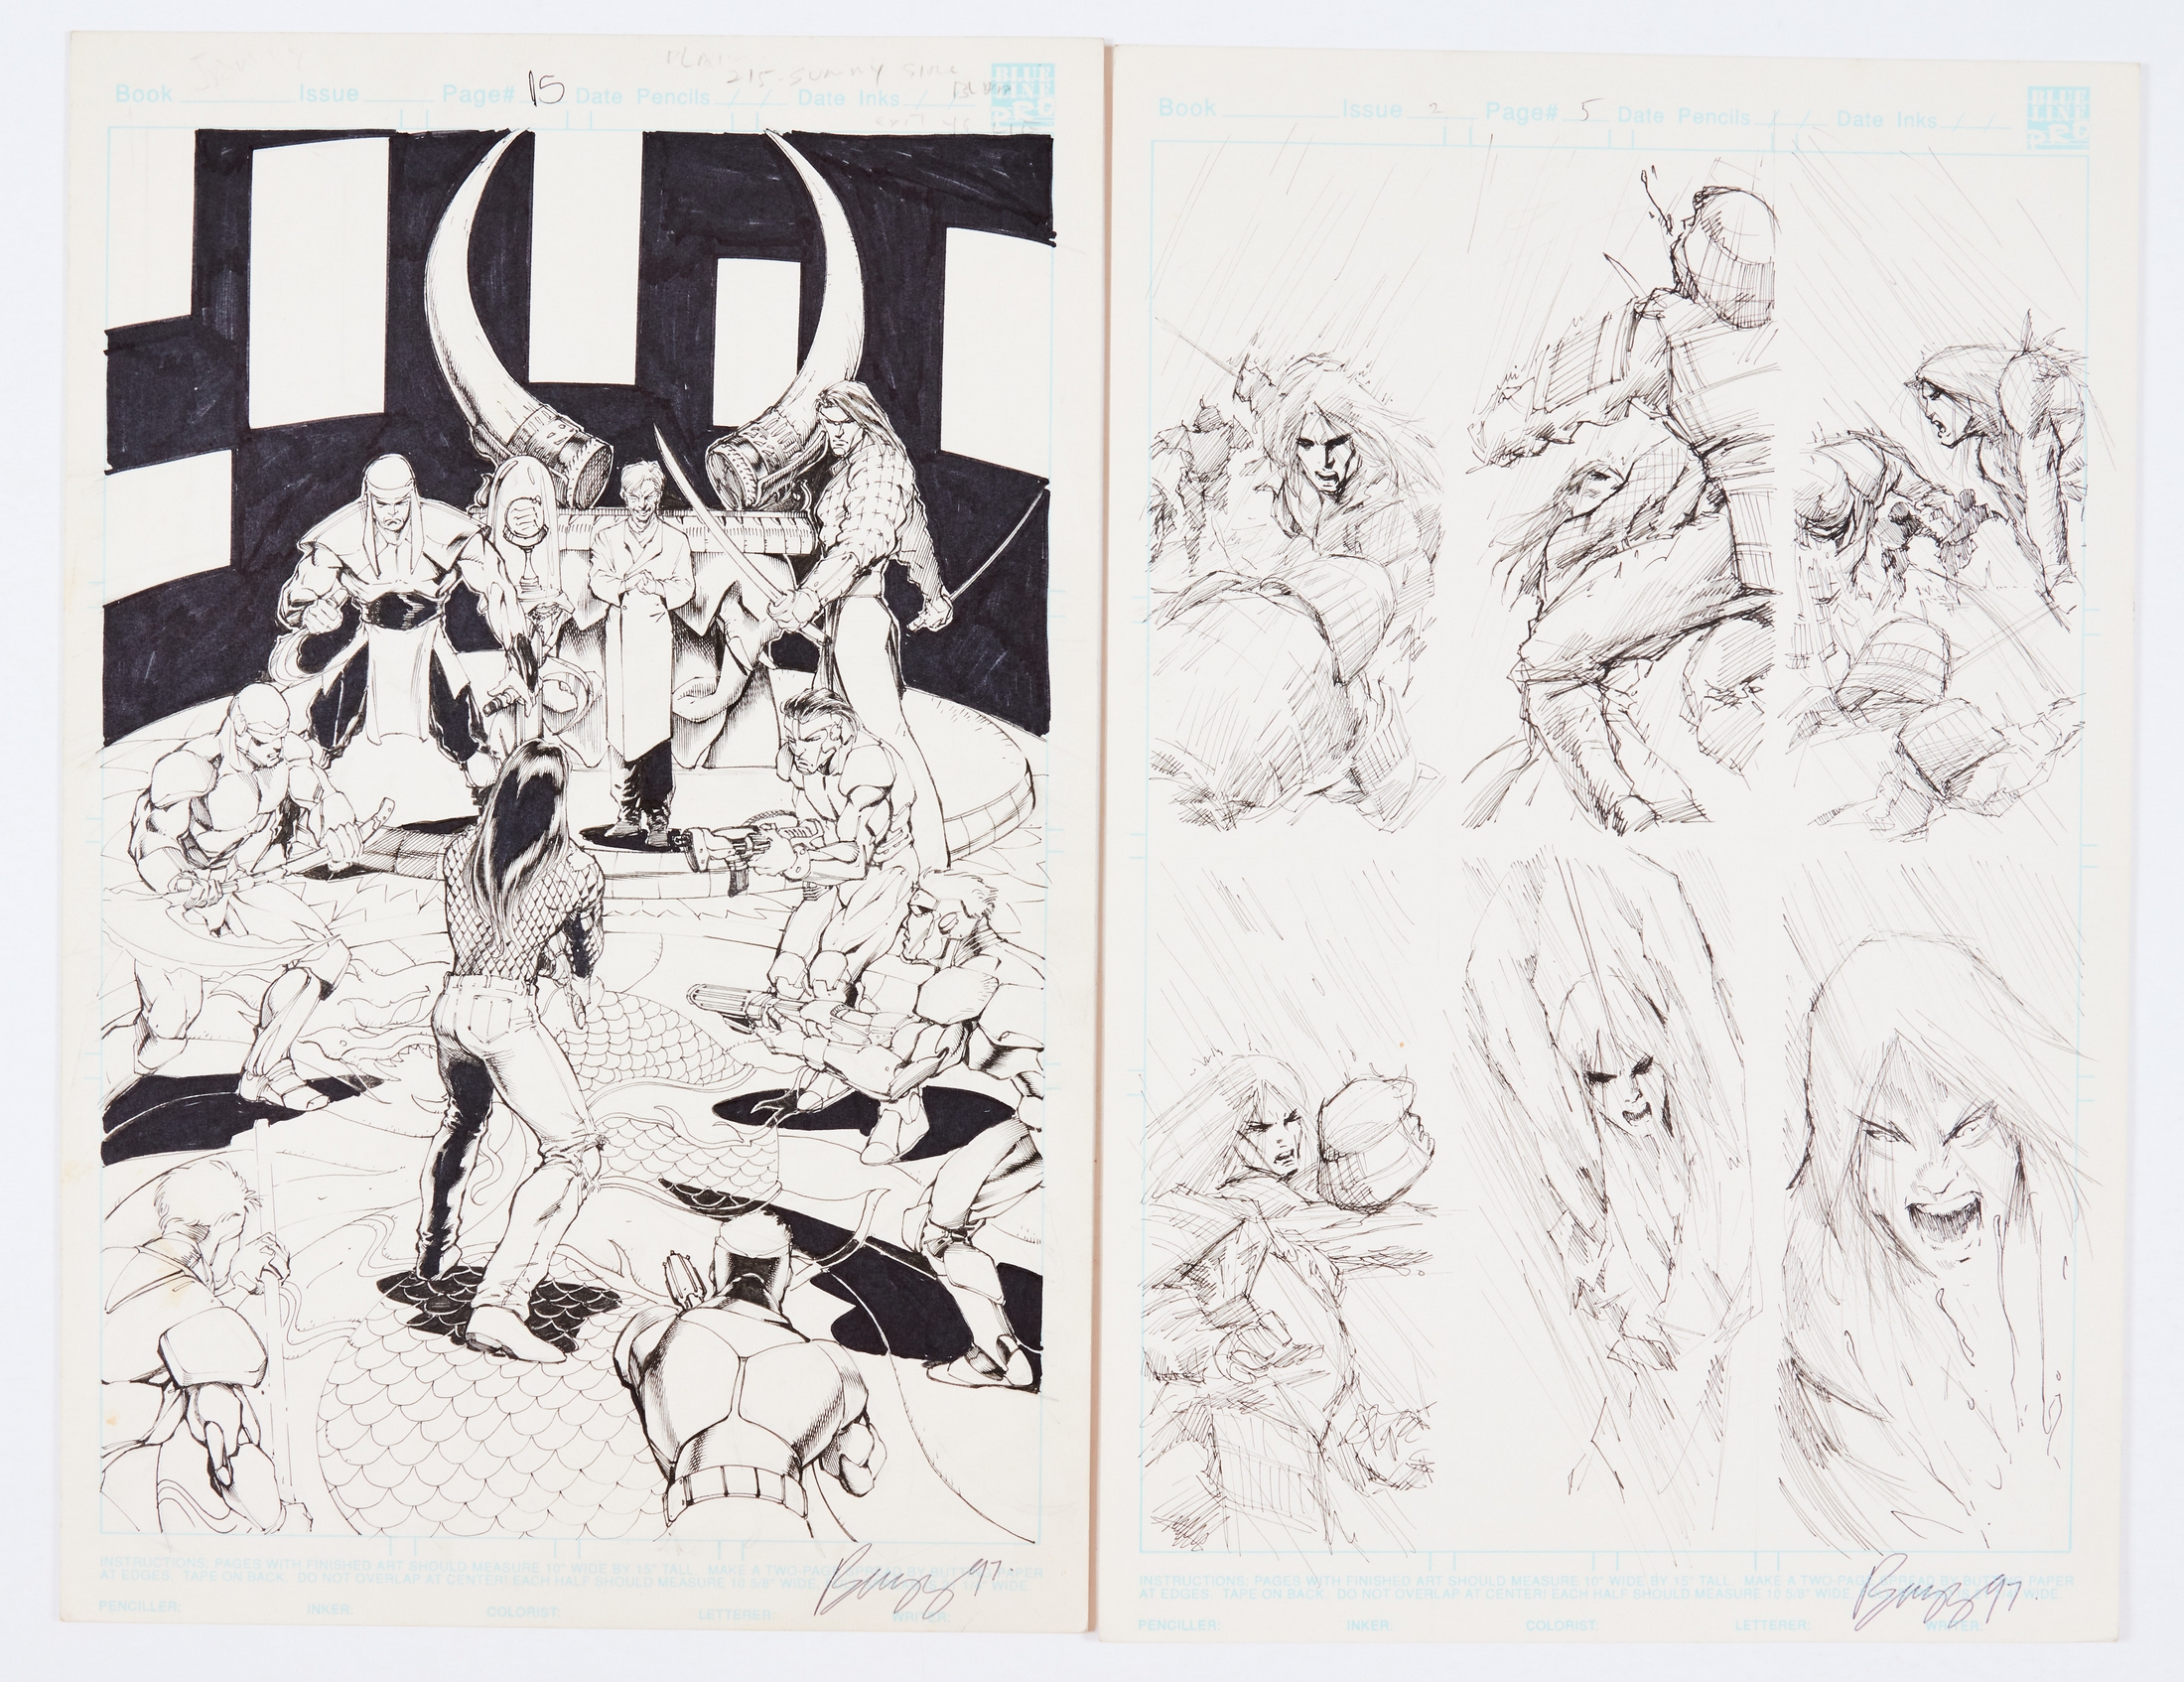 Chains of Chaos (1997) one original artwork and one sketch page both drawn and signed 'Buzz '97'.